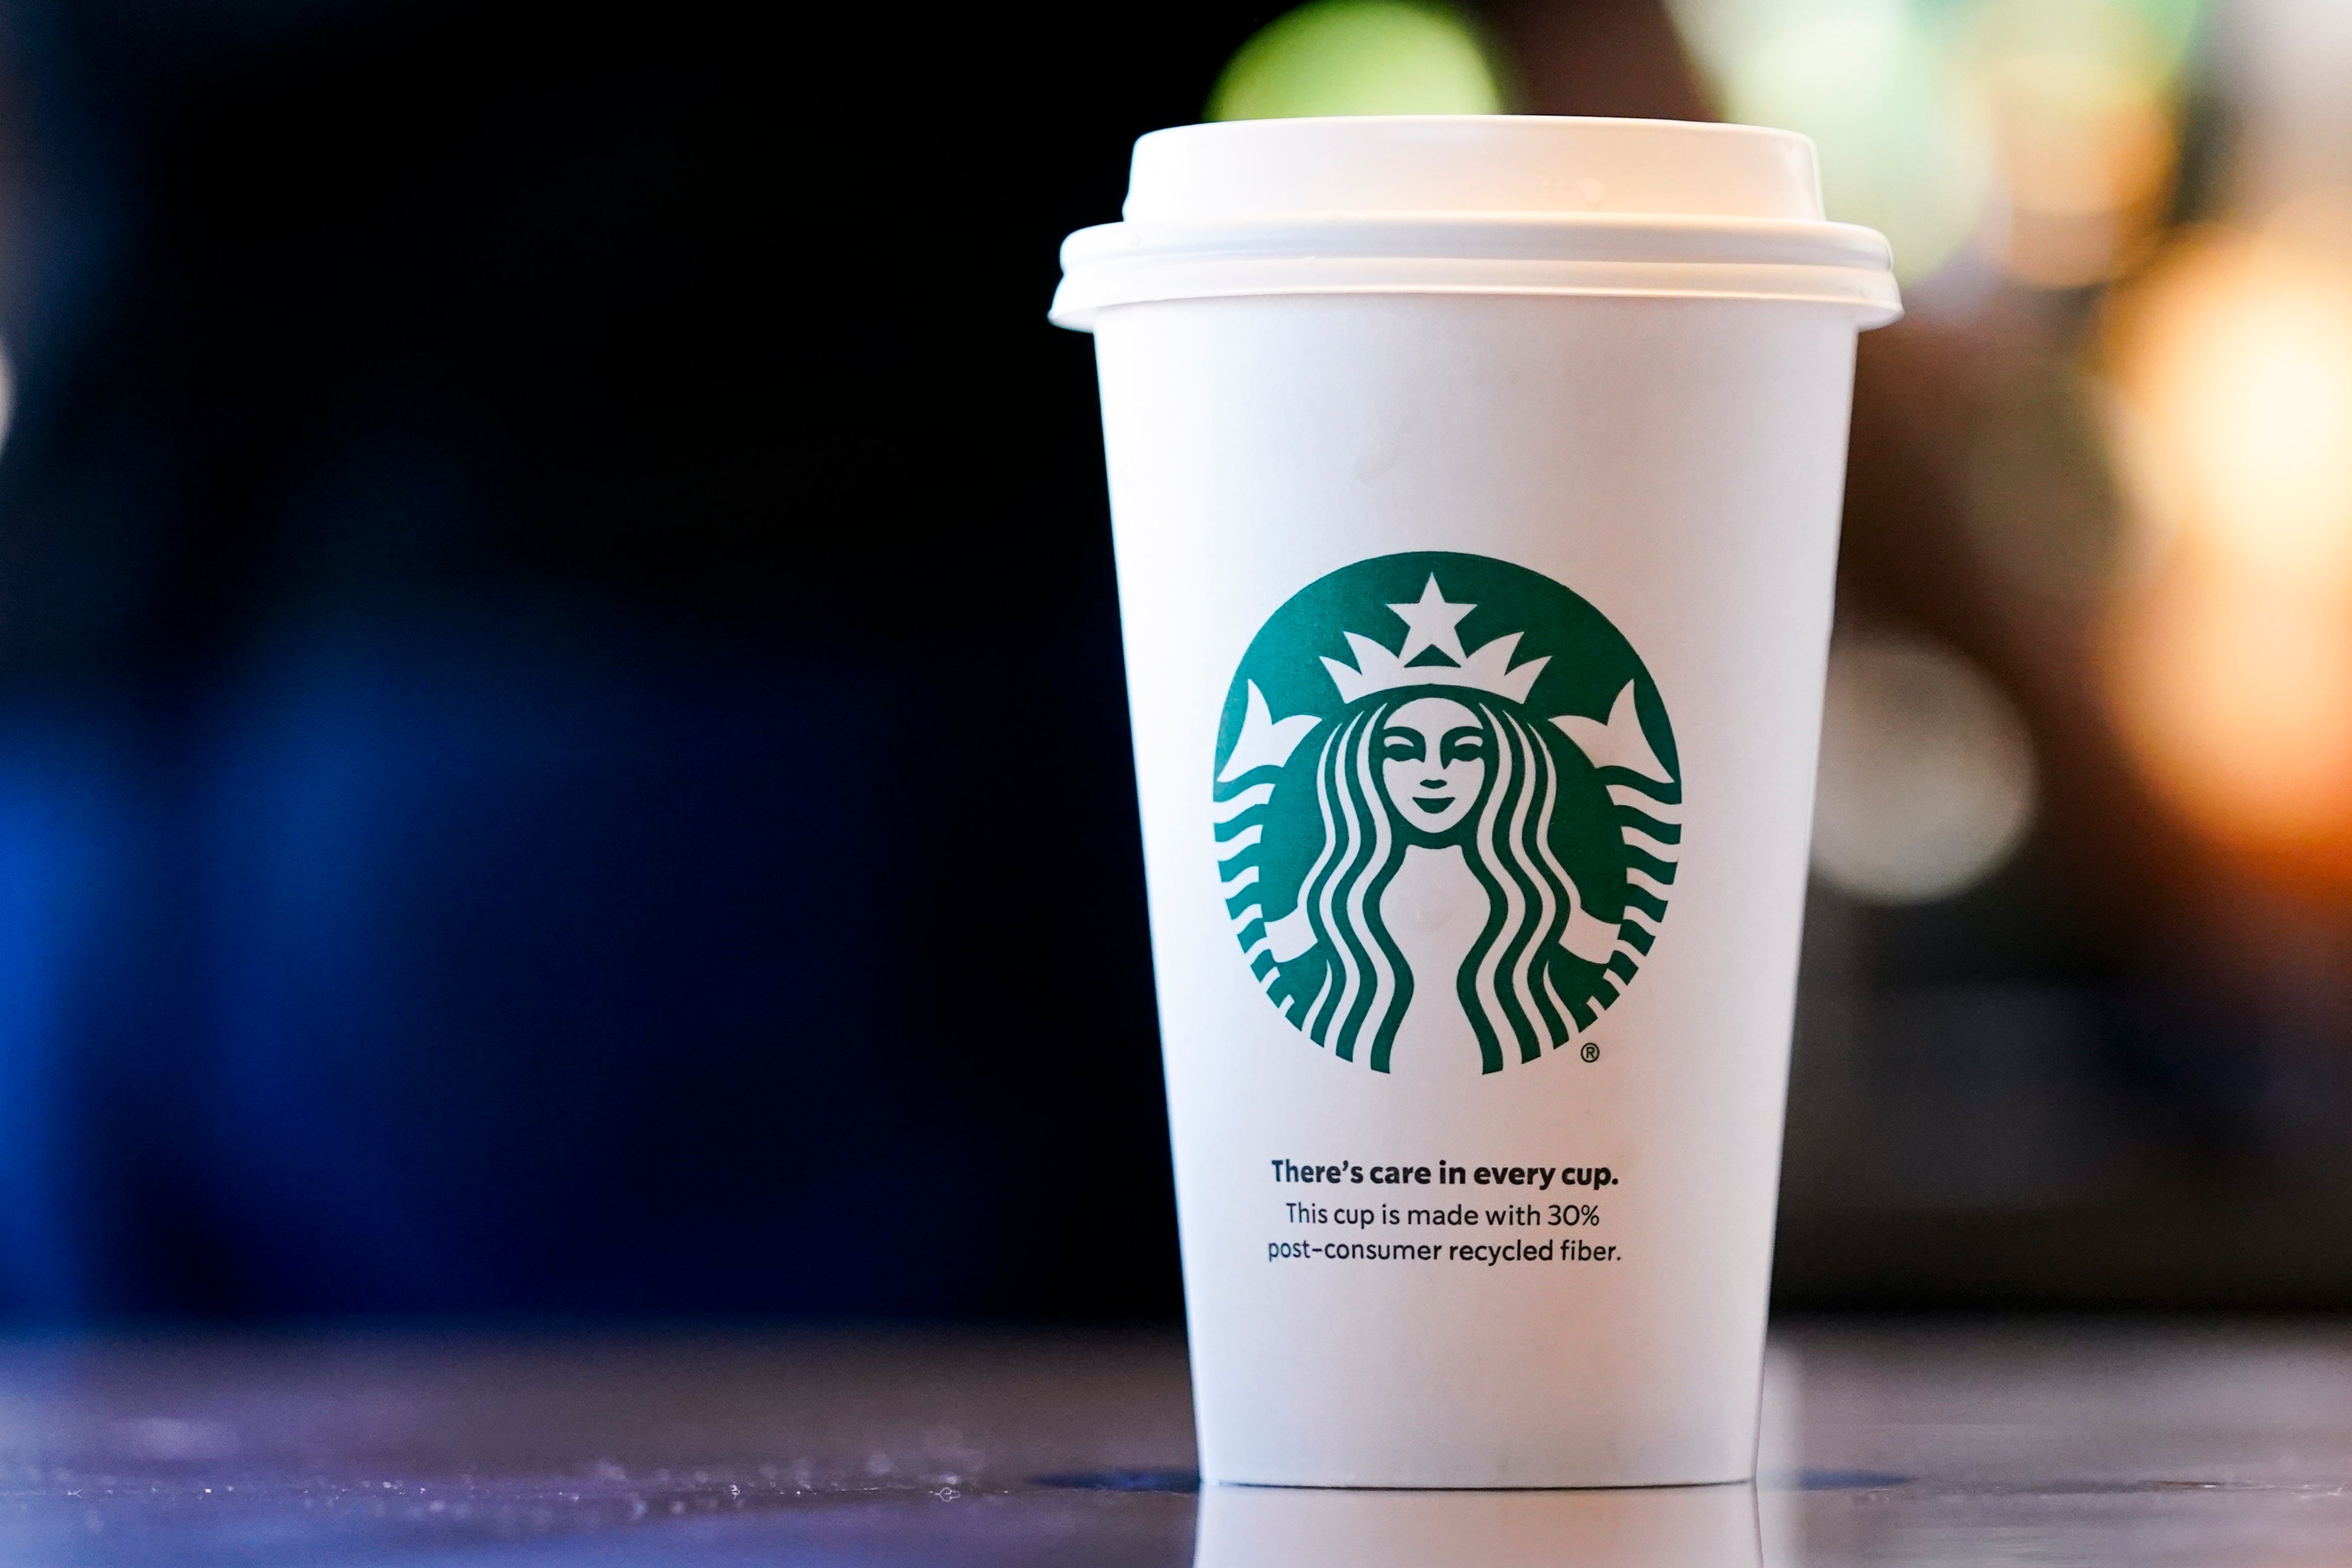 Starbucks has been targeted by pro-Palestinian activists over the war